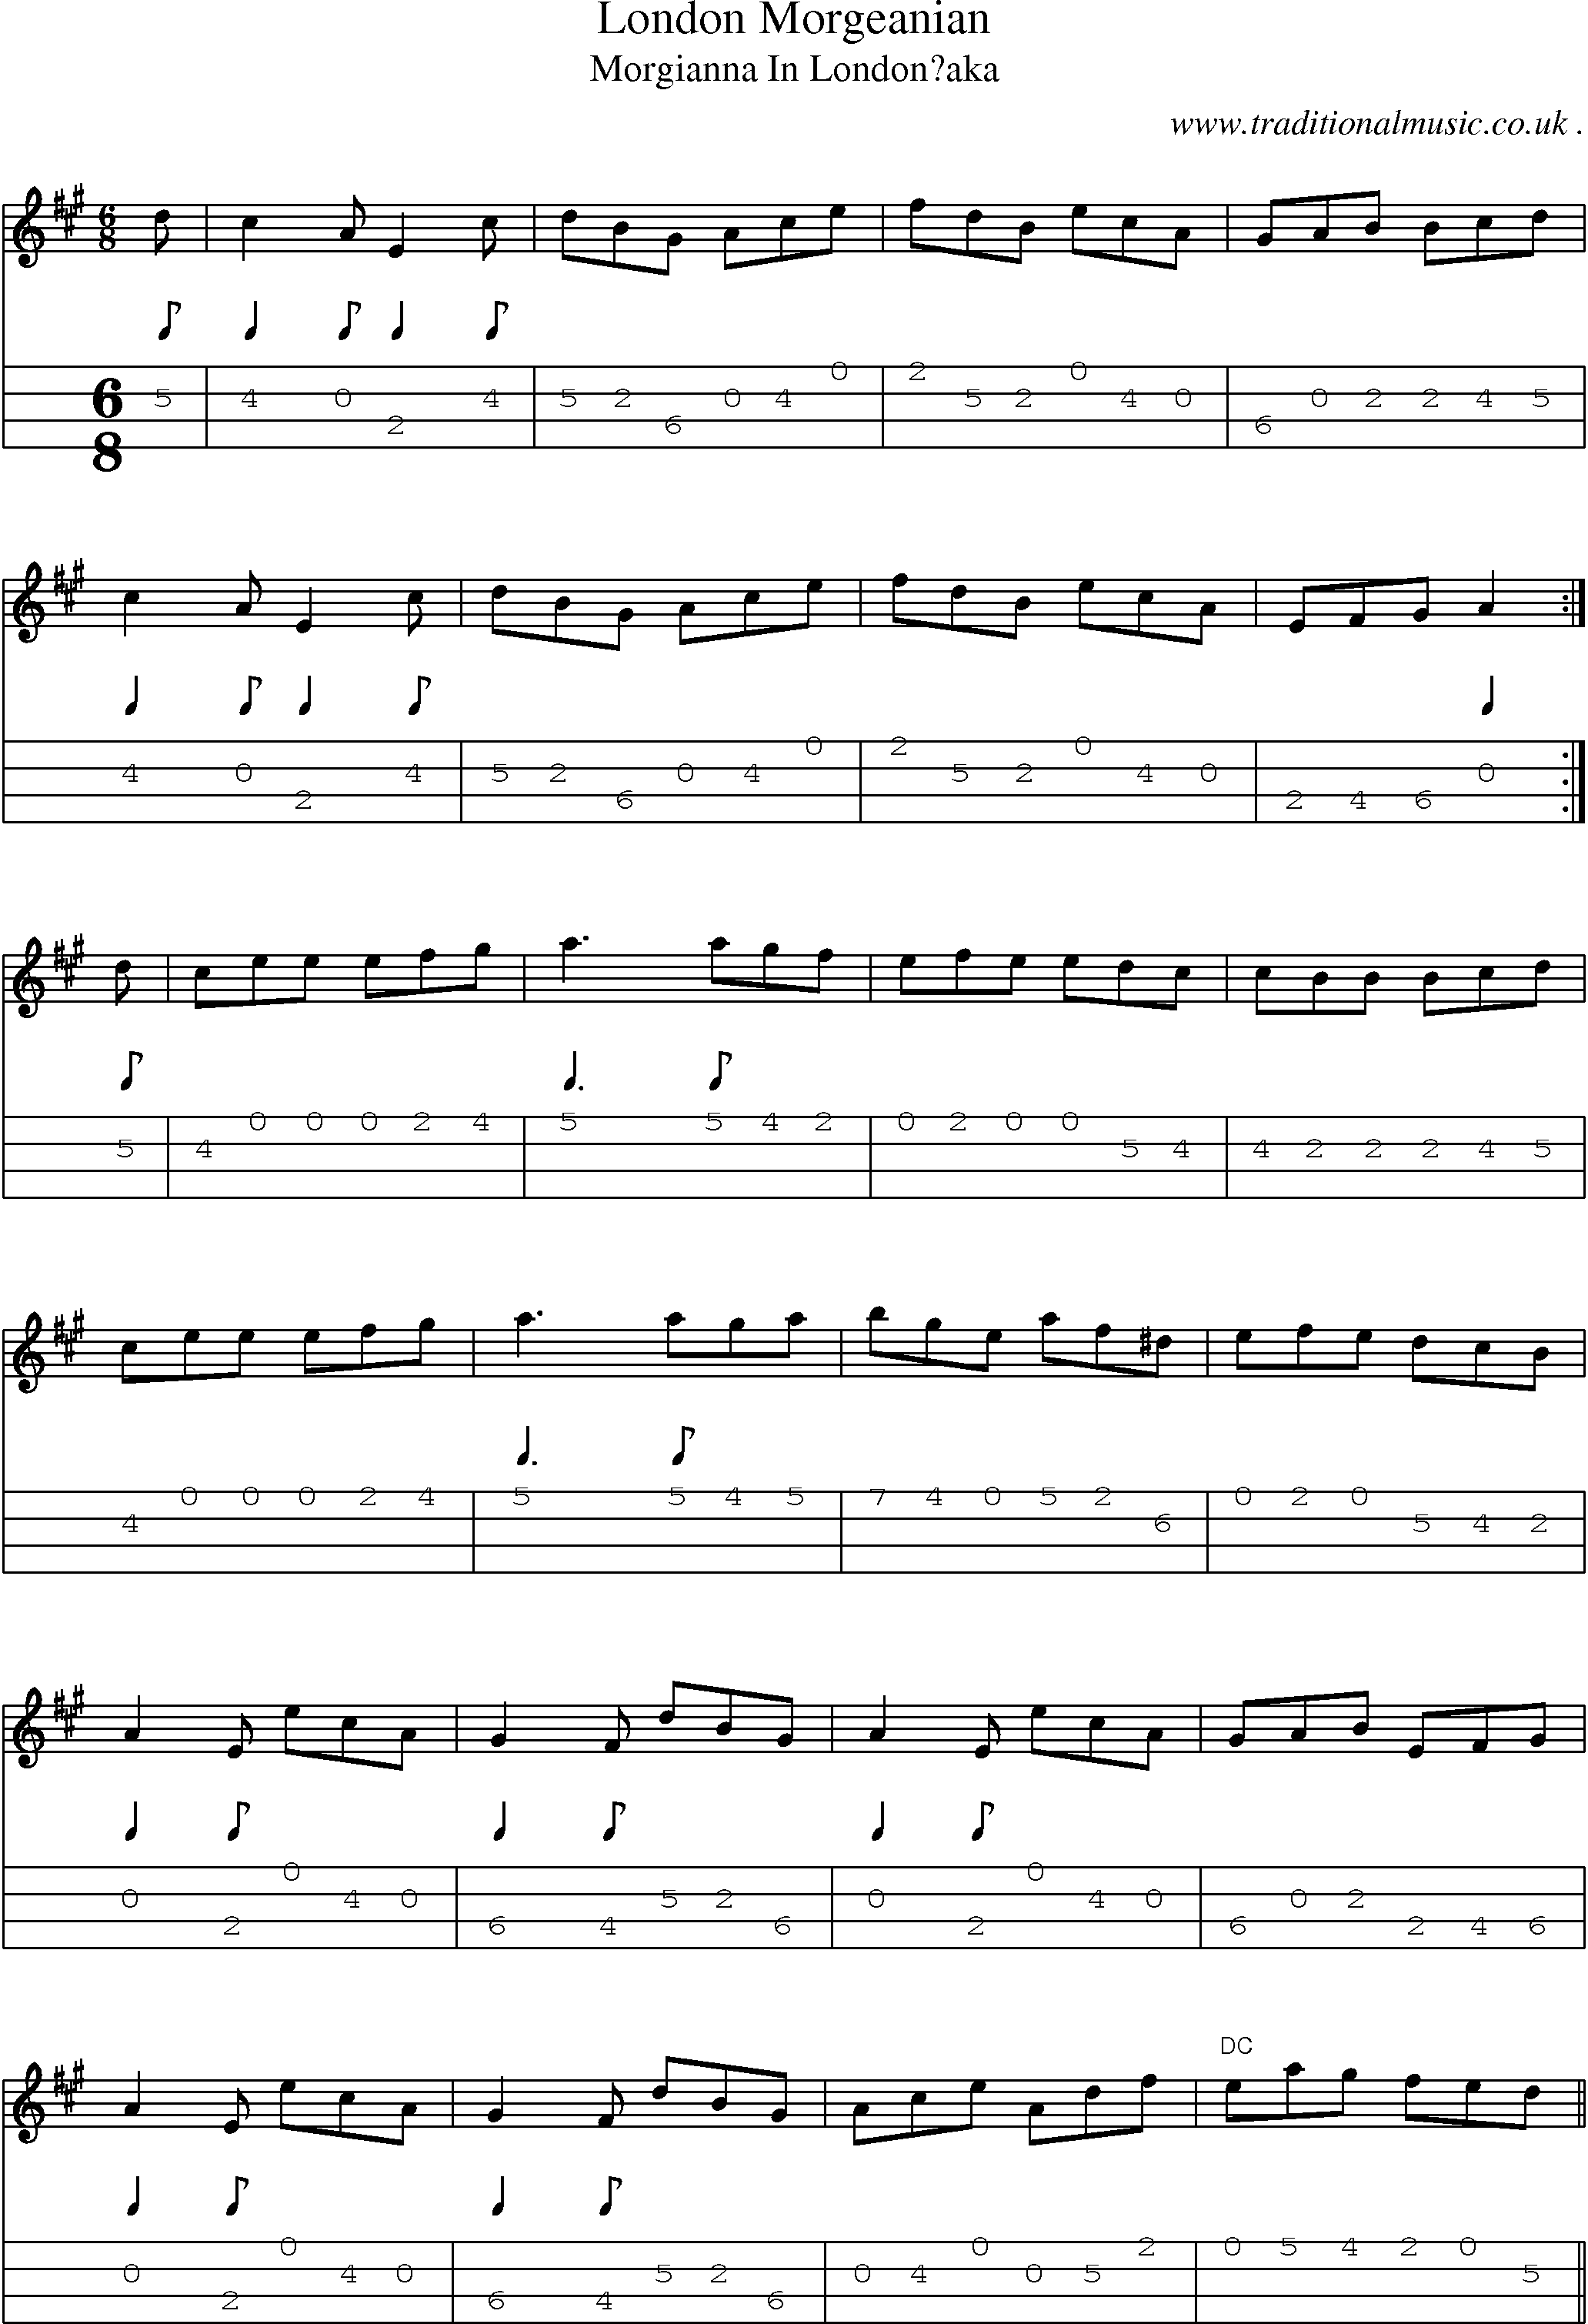 Sheet-Music and Mandolin Tabs for London Morgeanian